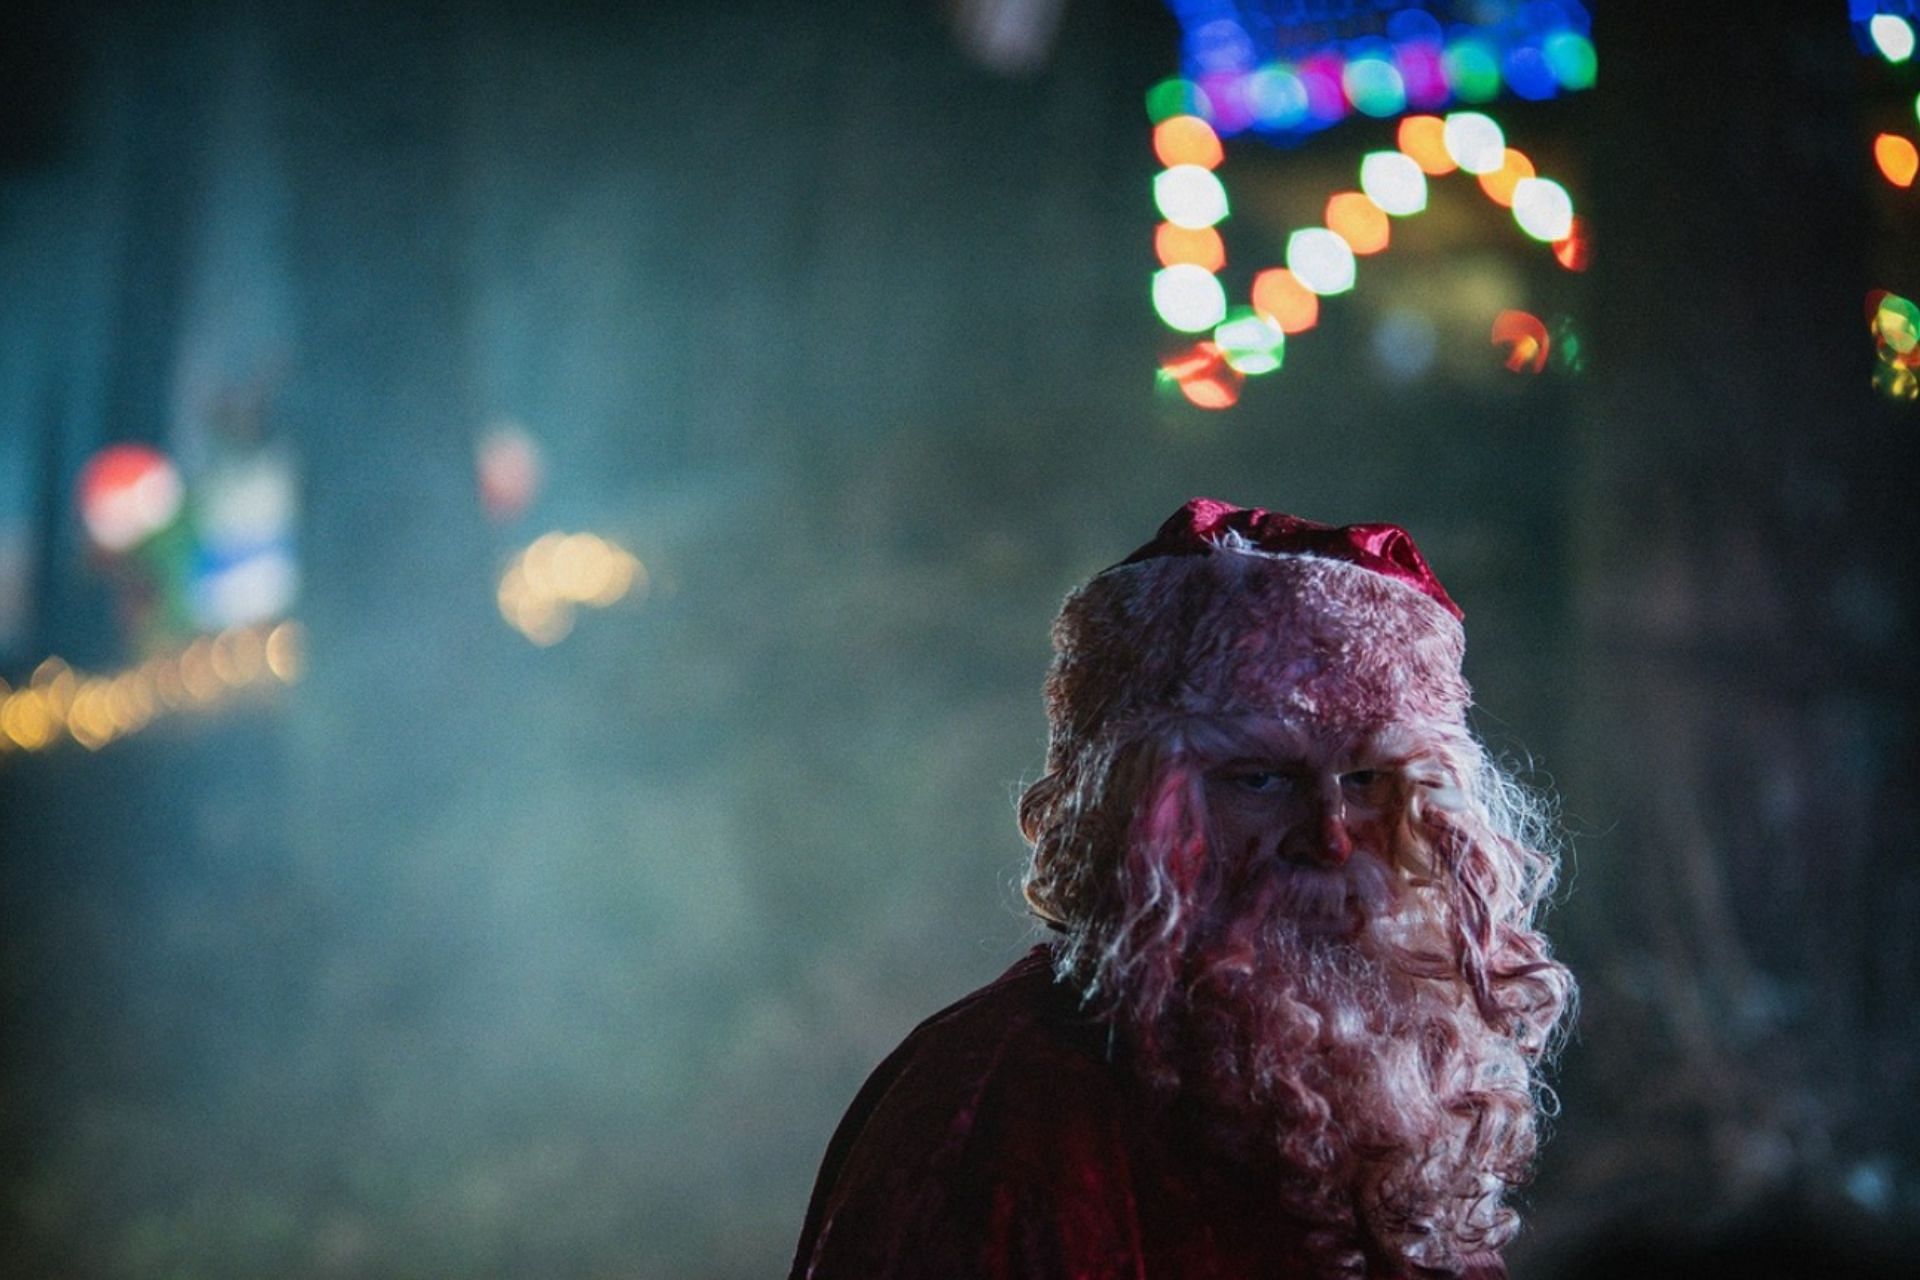 A still from Christmas Bloody Christmas. (Photo via Rotten Tomatoes)